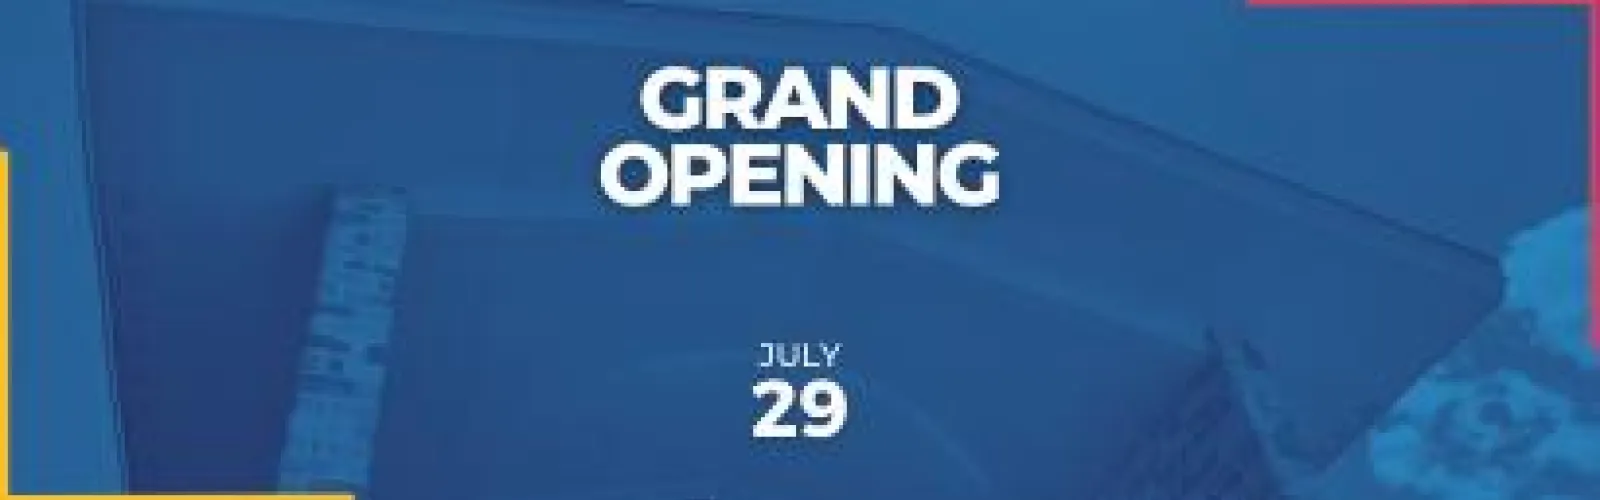 The new and expanded library will open on Monday, July 29th